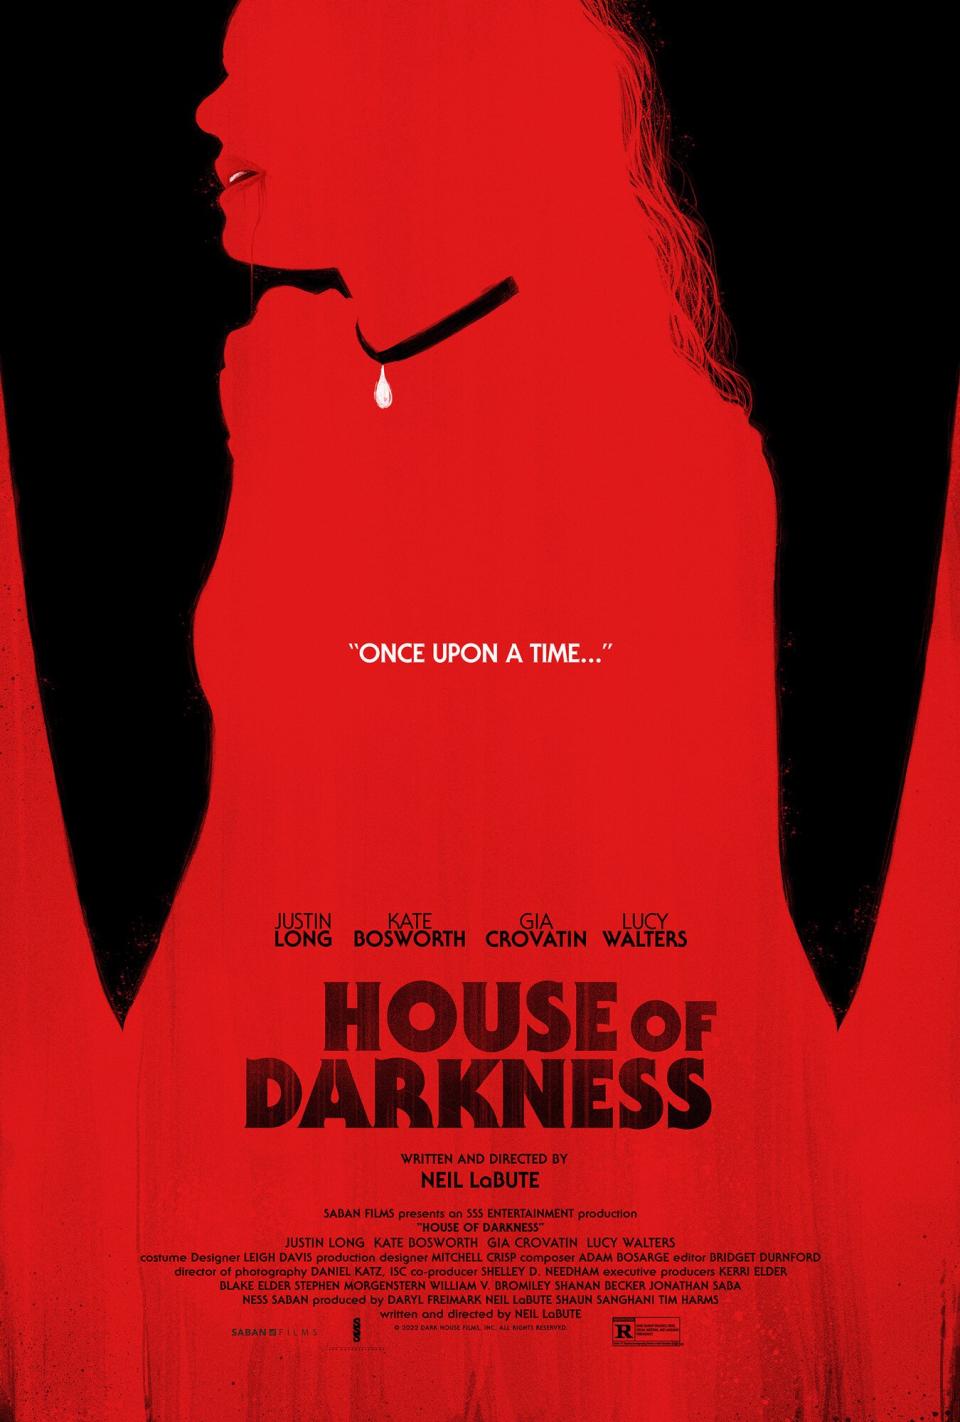 Real-Life Couple Justin Long and Kate Bosworth Play a Deadly Game in Trailer for House of Darkness